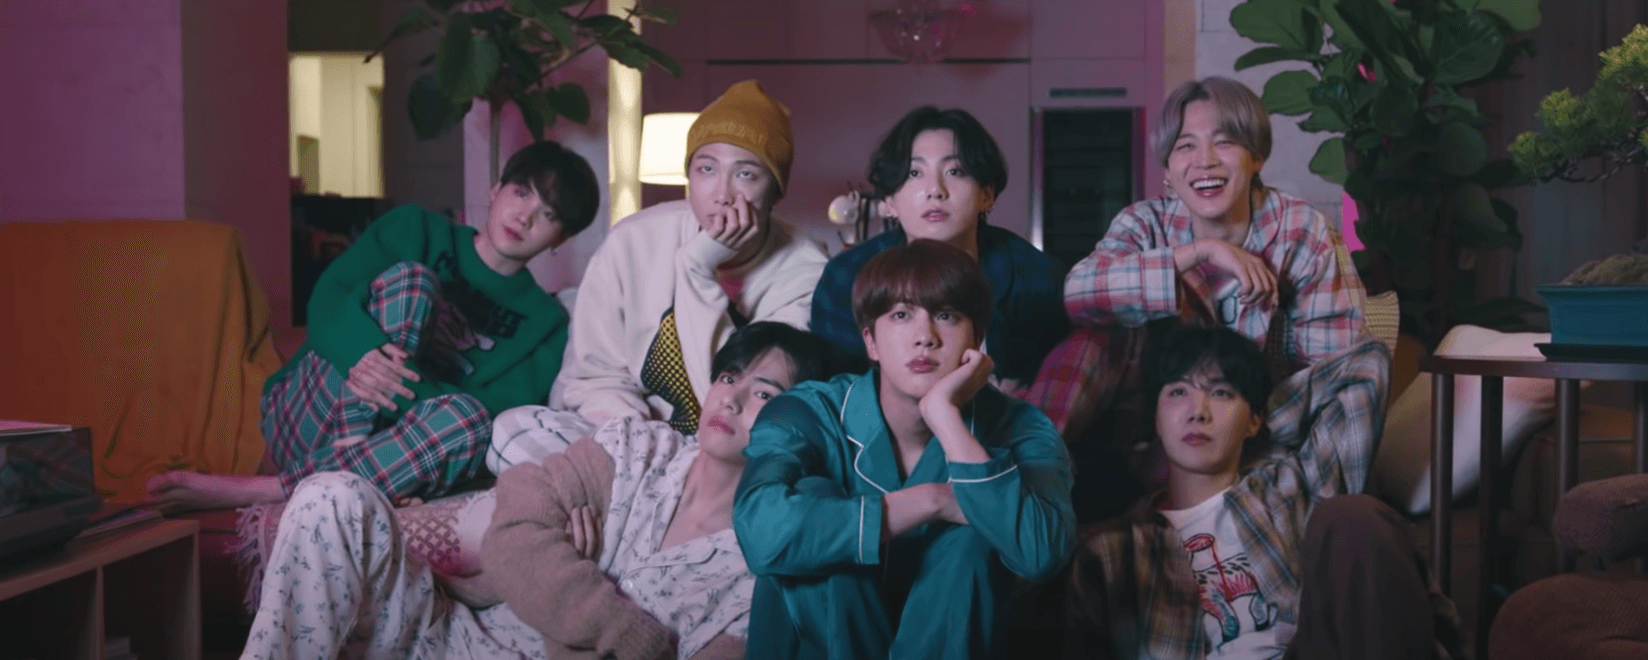 New BTS album ‘BE’ racks up millions of listens within hours